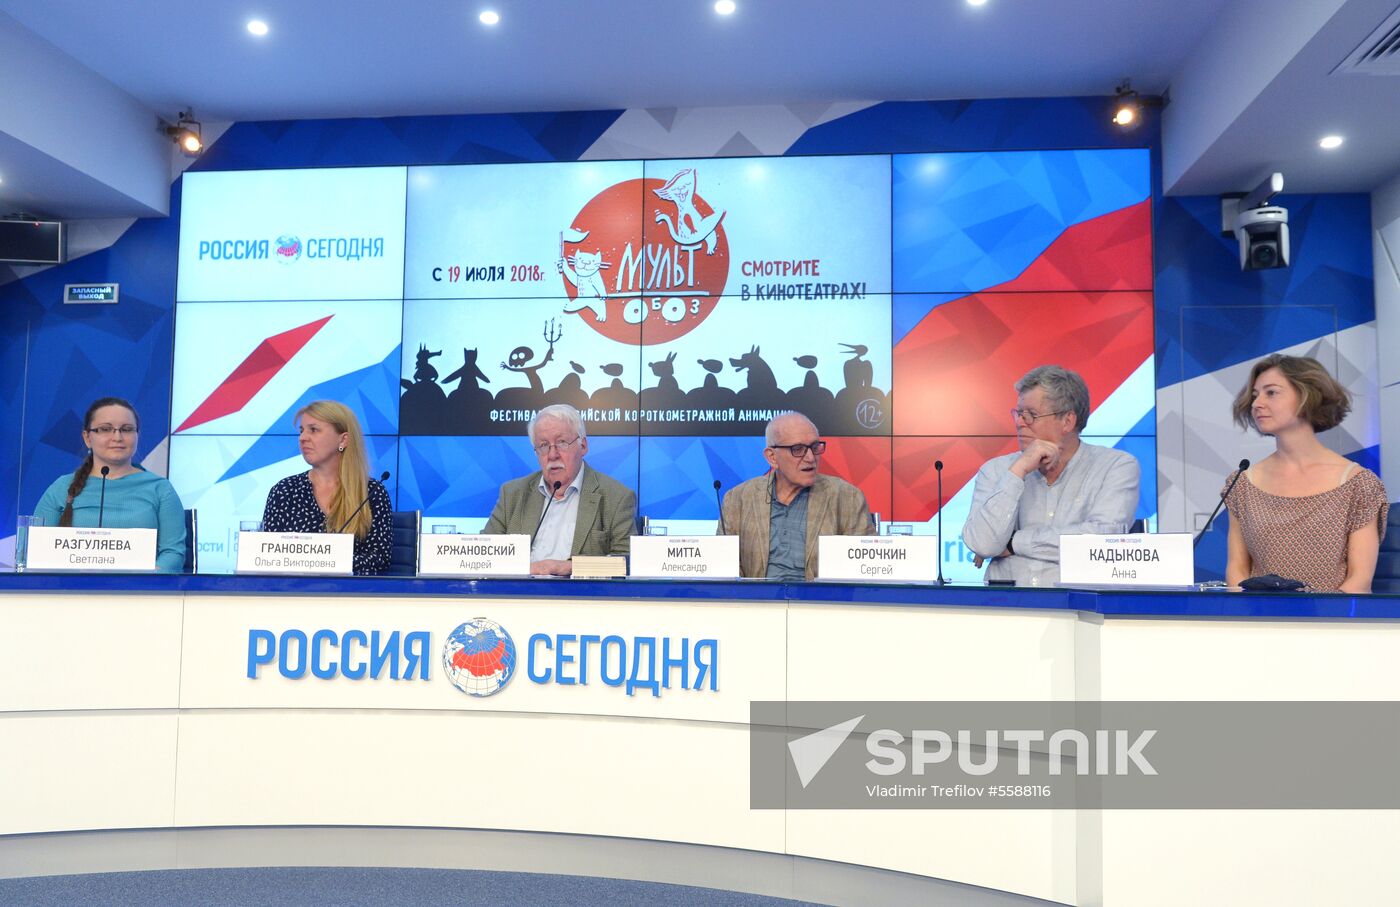 News conference ahead of Multoboz festival of Russian animated short film scheduled for July 19